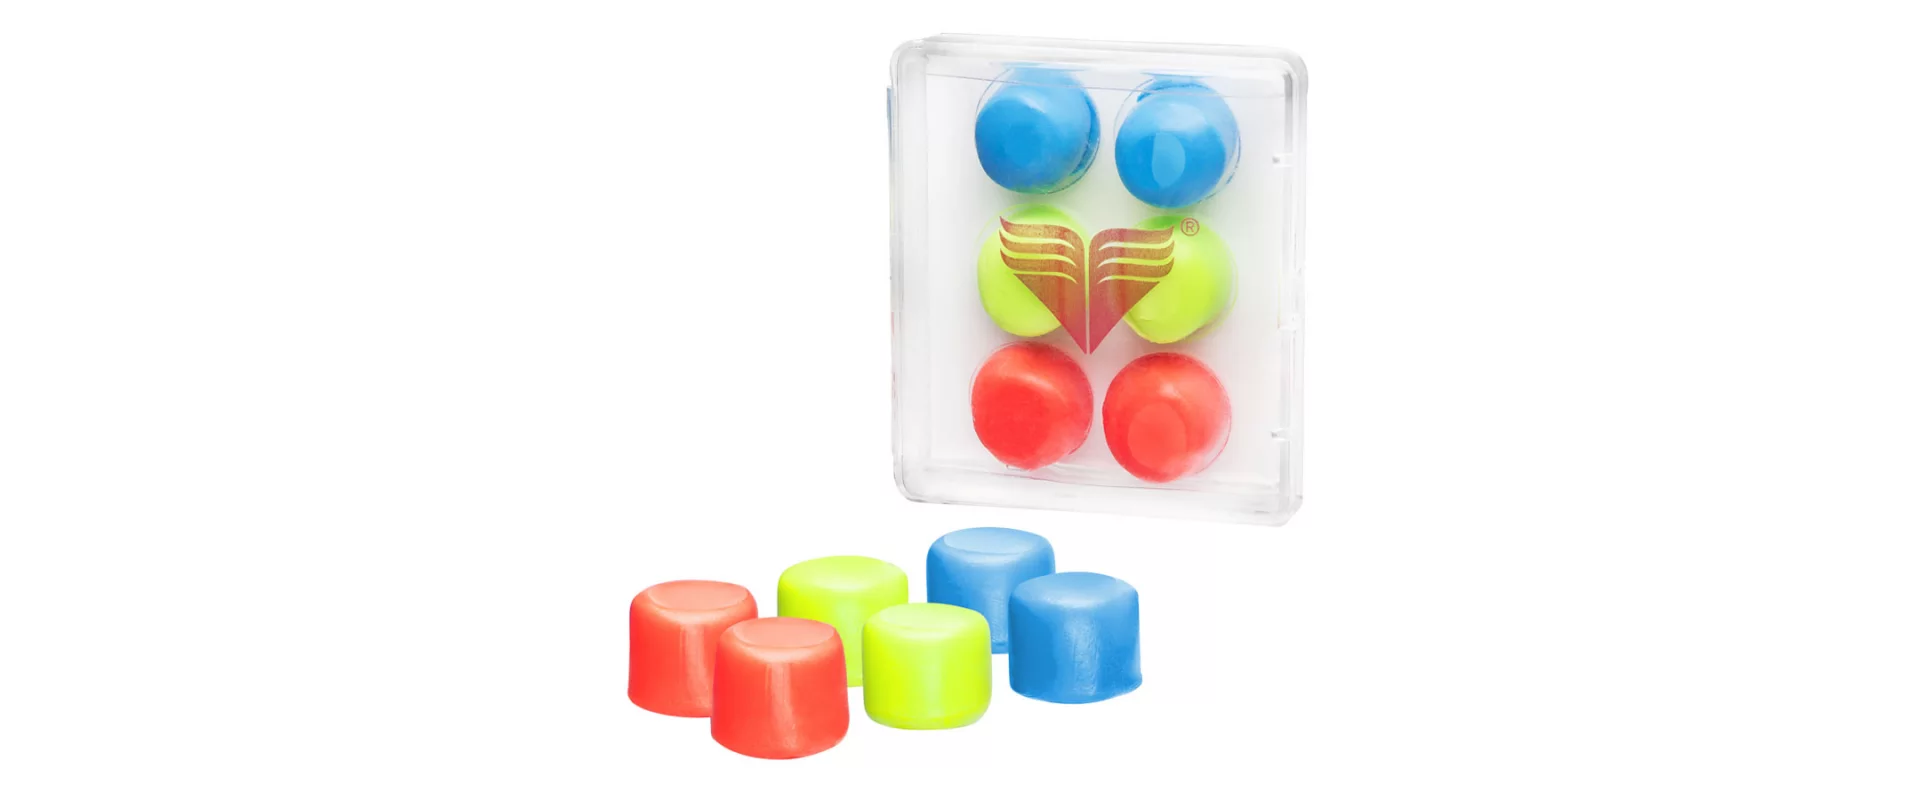 TYR Youth Multi-Colored Silicone Ear Plugs / Беруши для бассейна